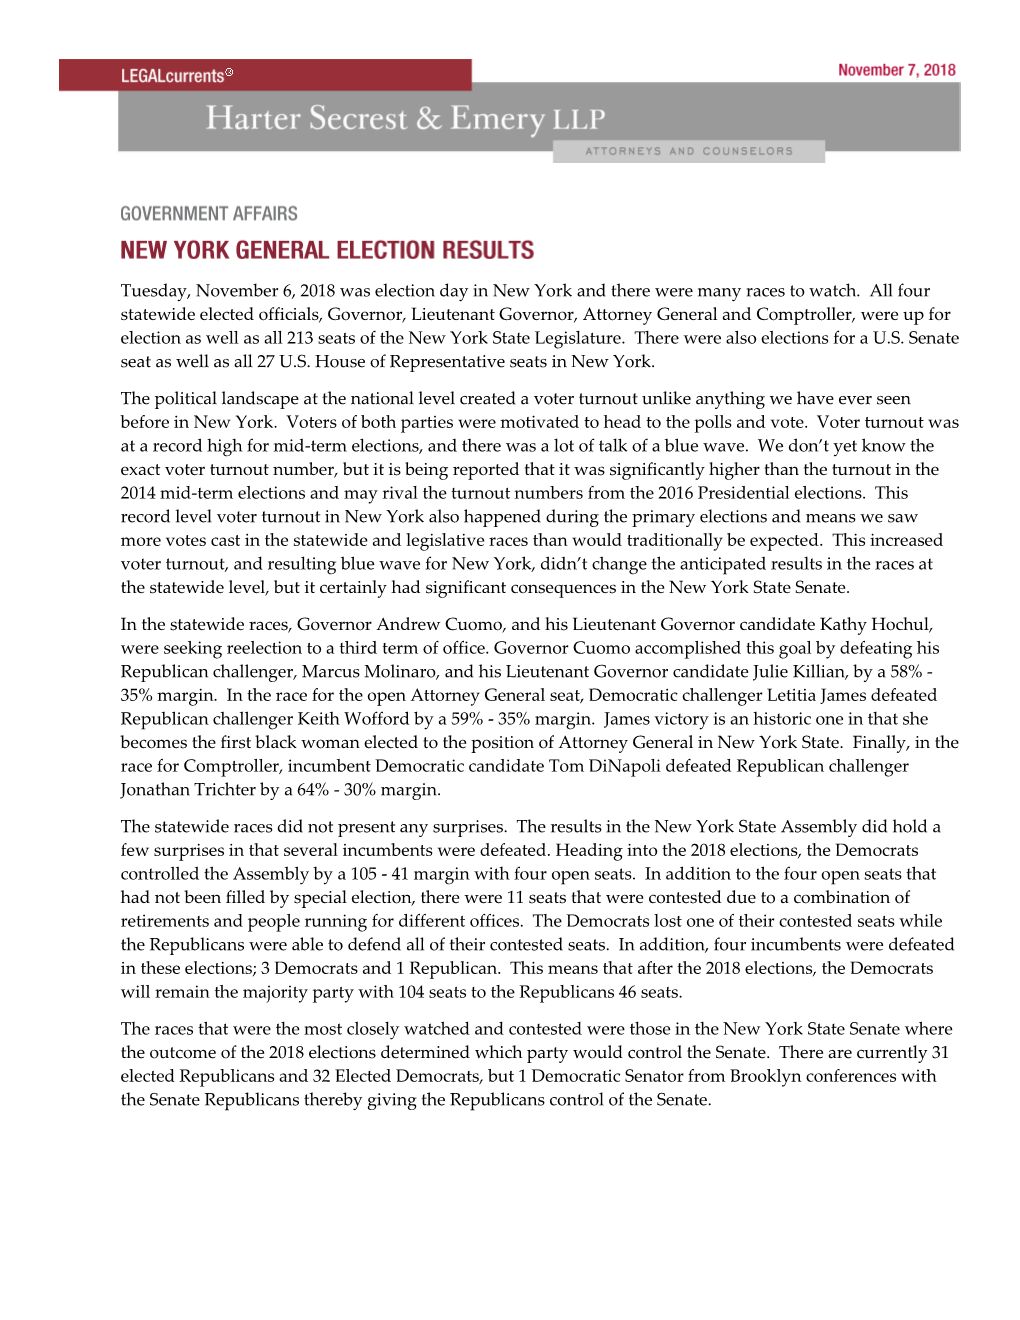 View New York General Election Results